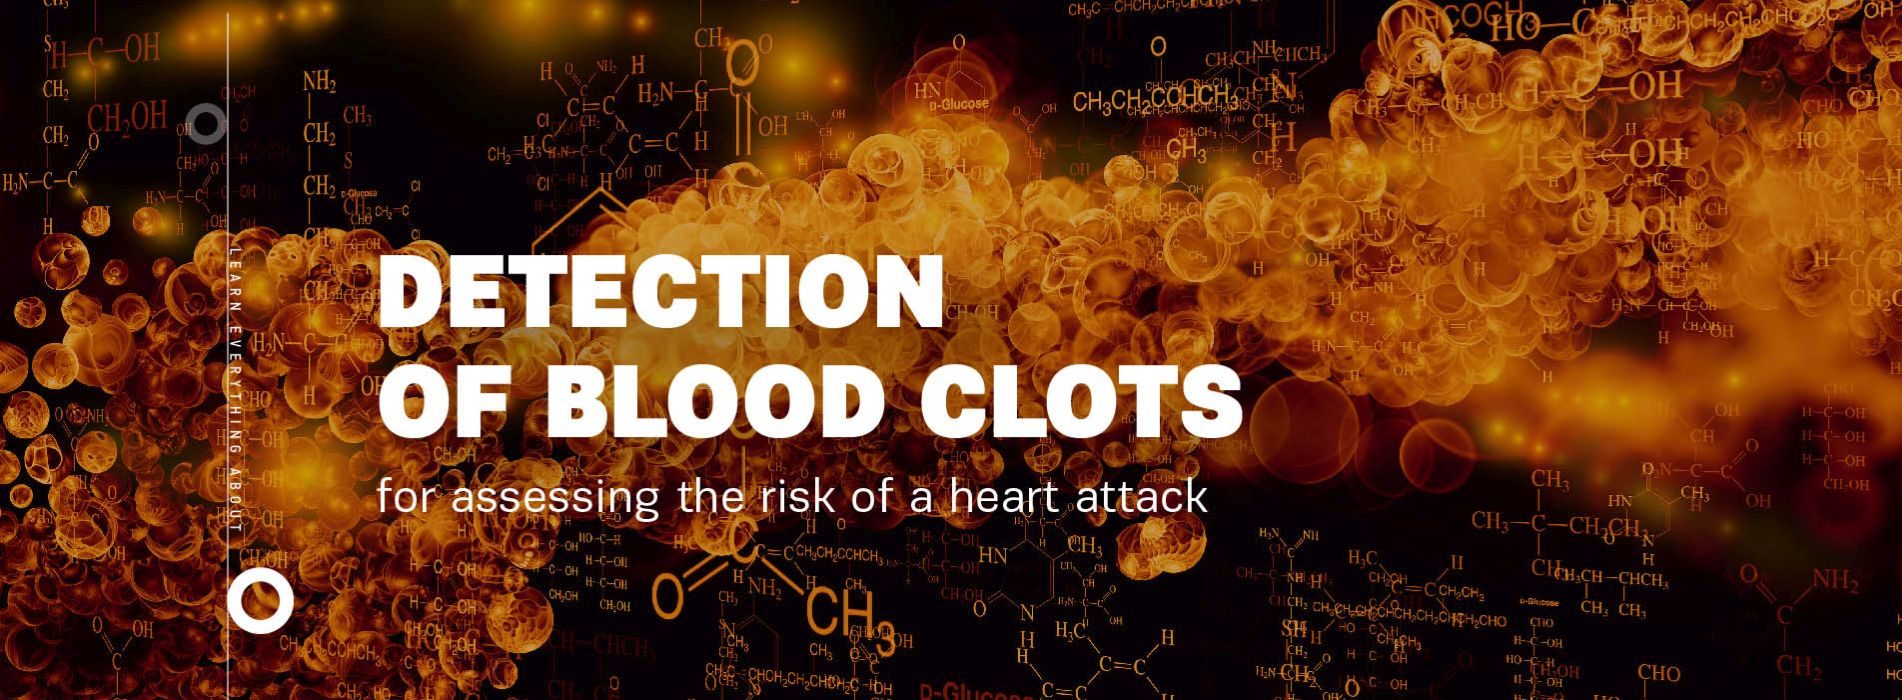 Detection of blood clots for assessing the risk of a heart attack